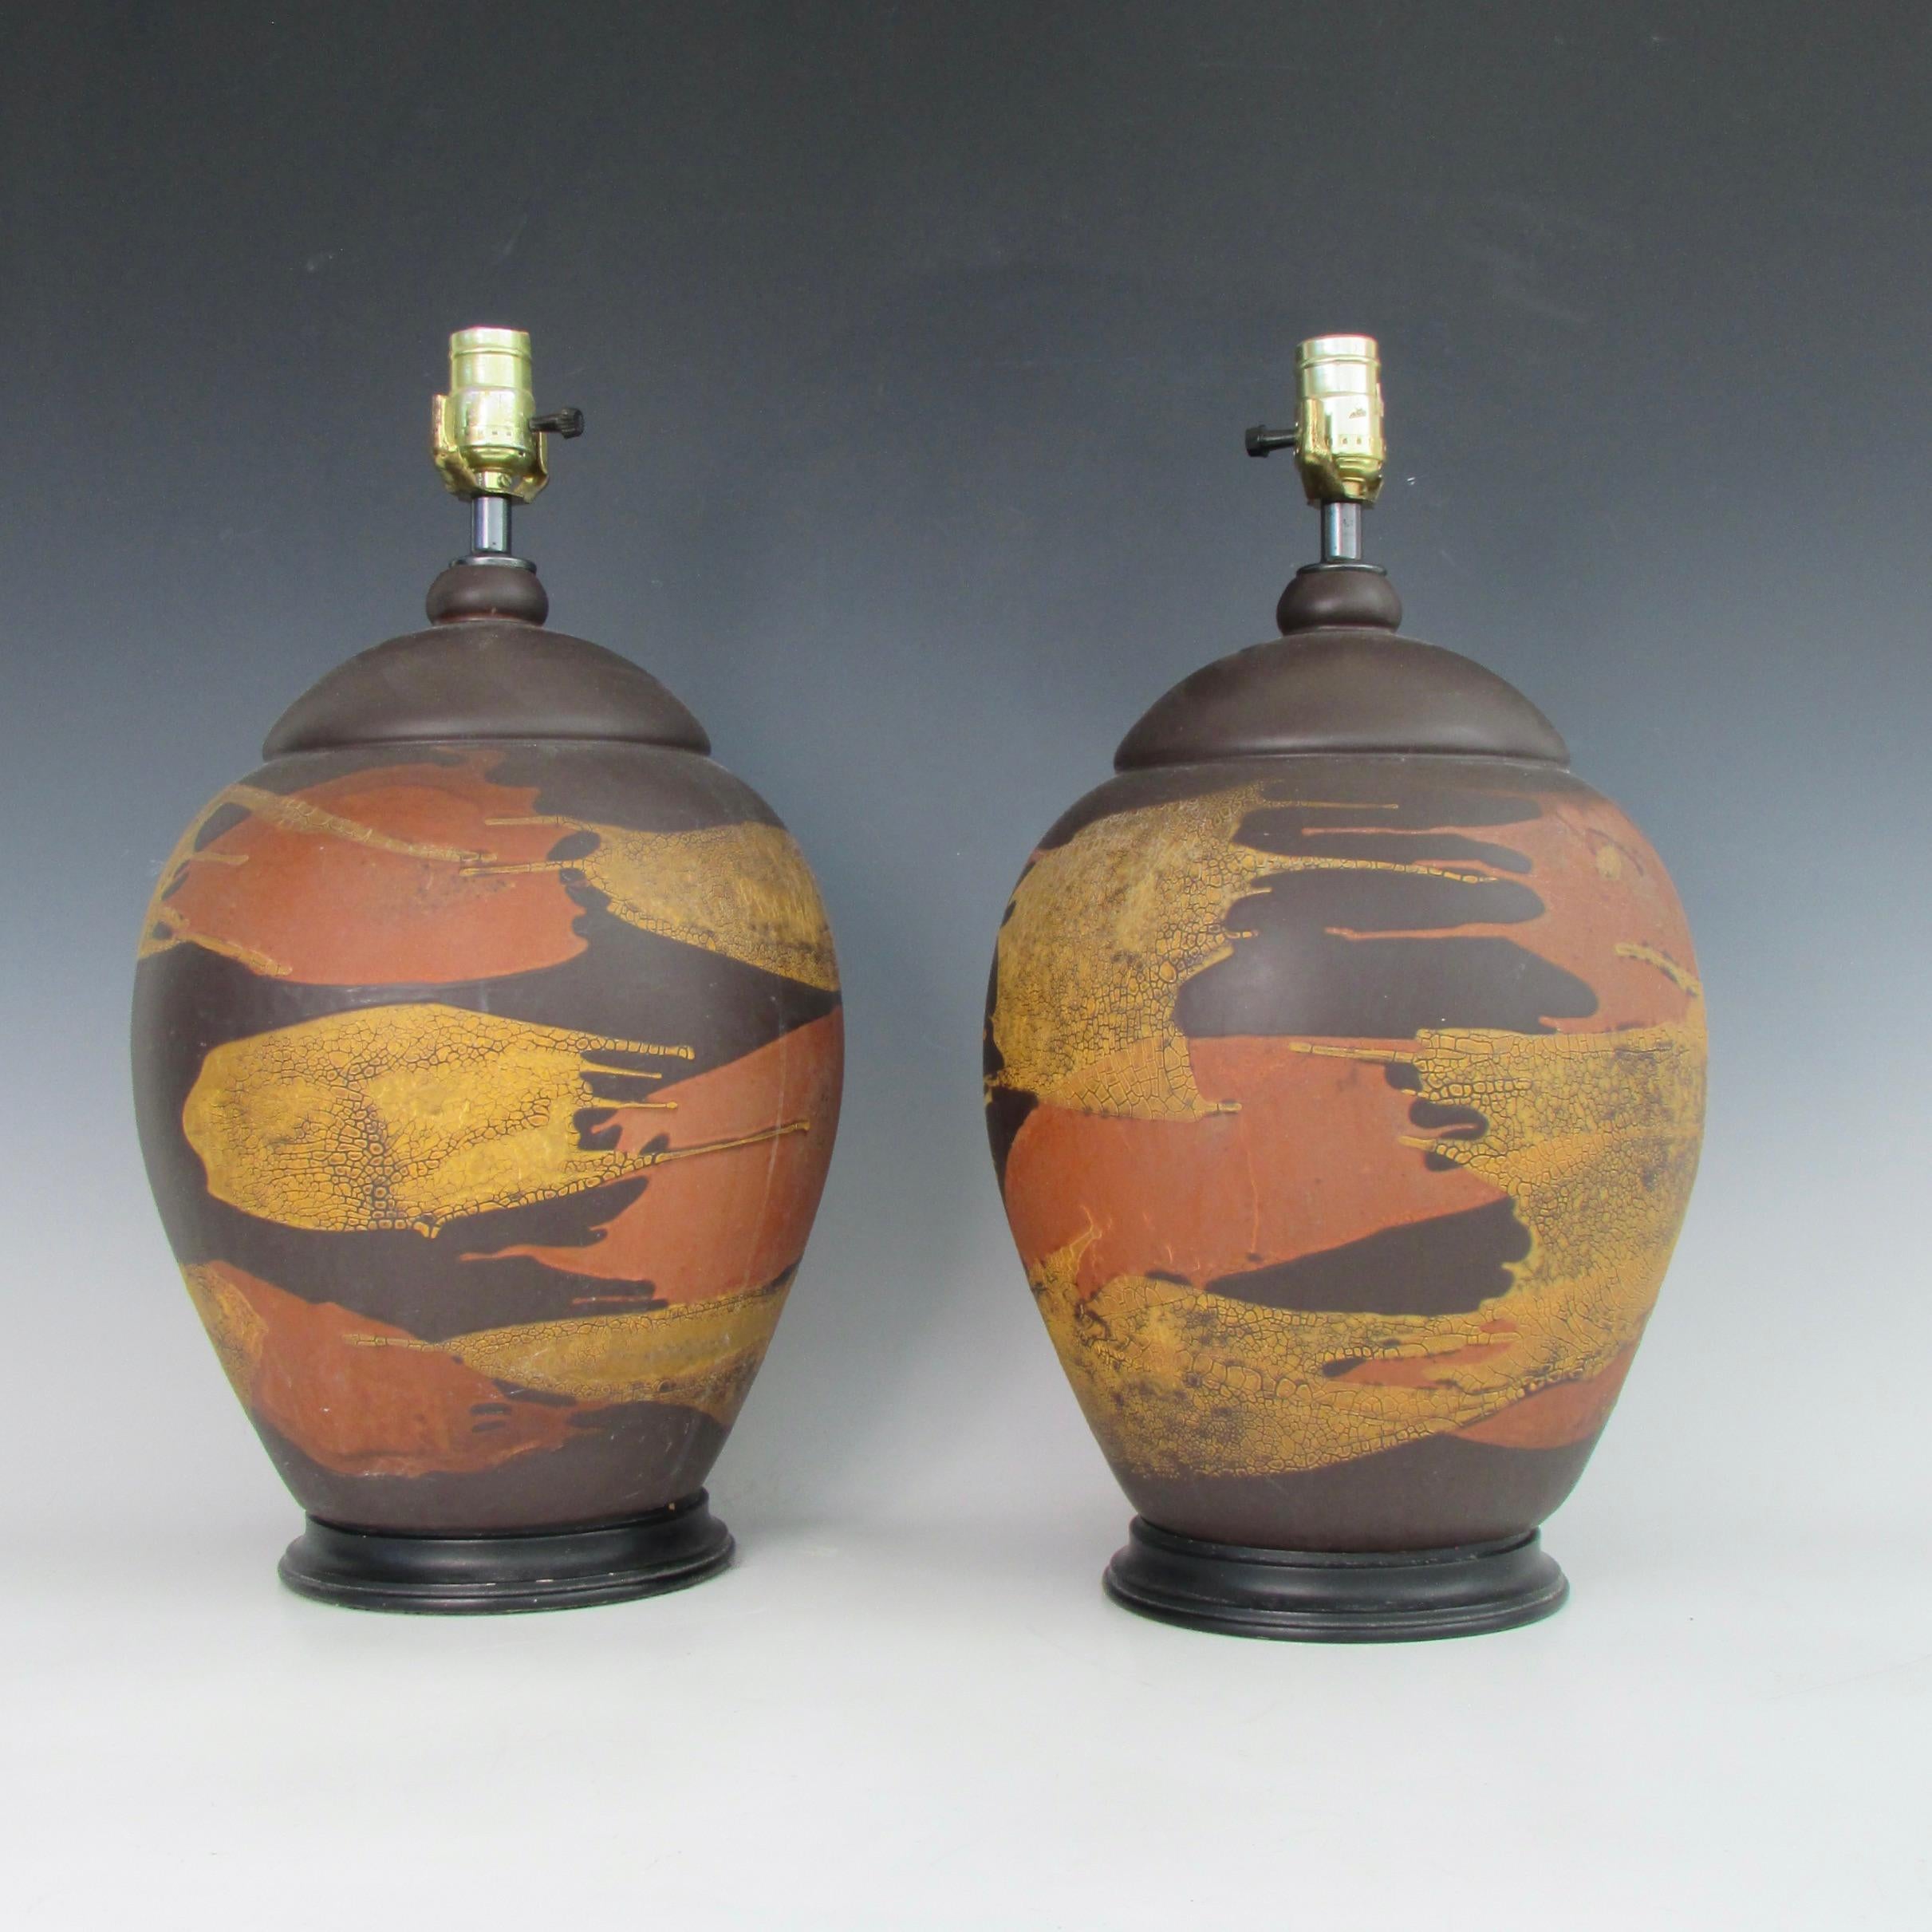 Pair of bulbous form table lamps. Fired in orange, brown, golden yellow autumn earth tones. Height measurement of 16